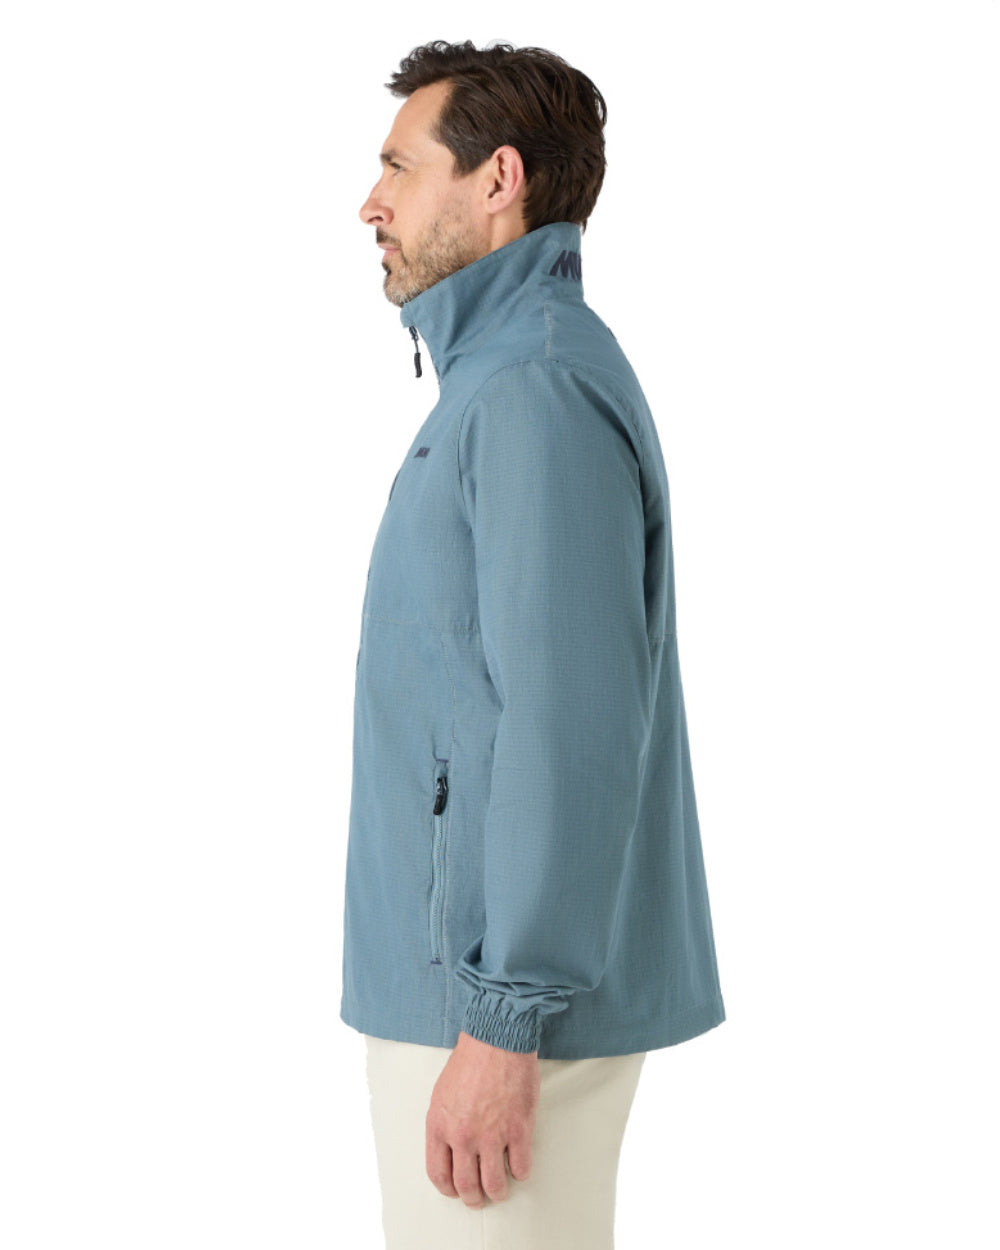 Stormy Weather Coloured Musto Mens Coastal Waterproof Jacket On A White Background 